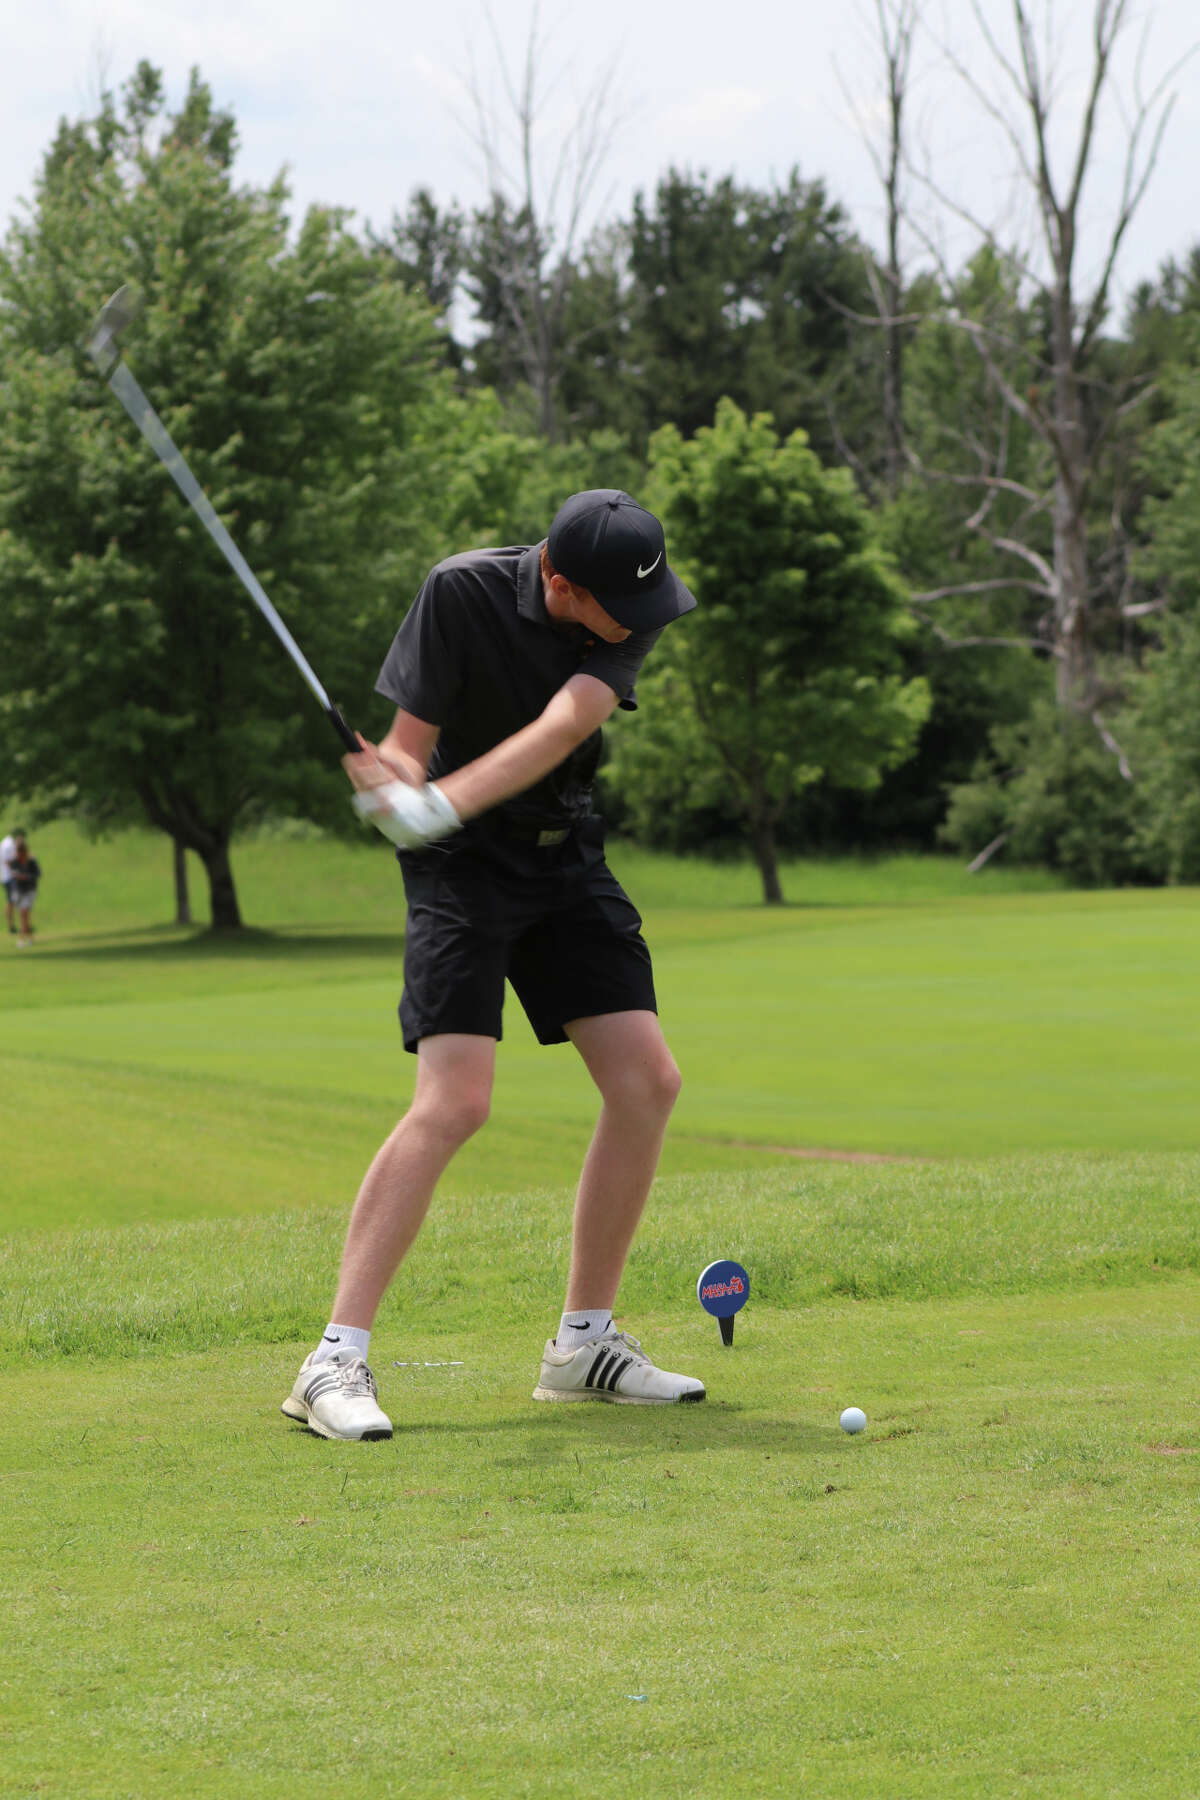 Dow High's Jacob O'Connor tees off during the Division 1 state final at Katke Golf Course in Big Rapids on Saturday, June 11, 2022.